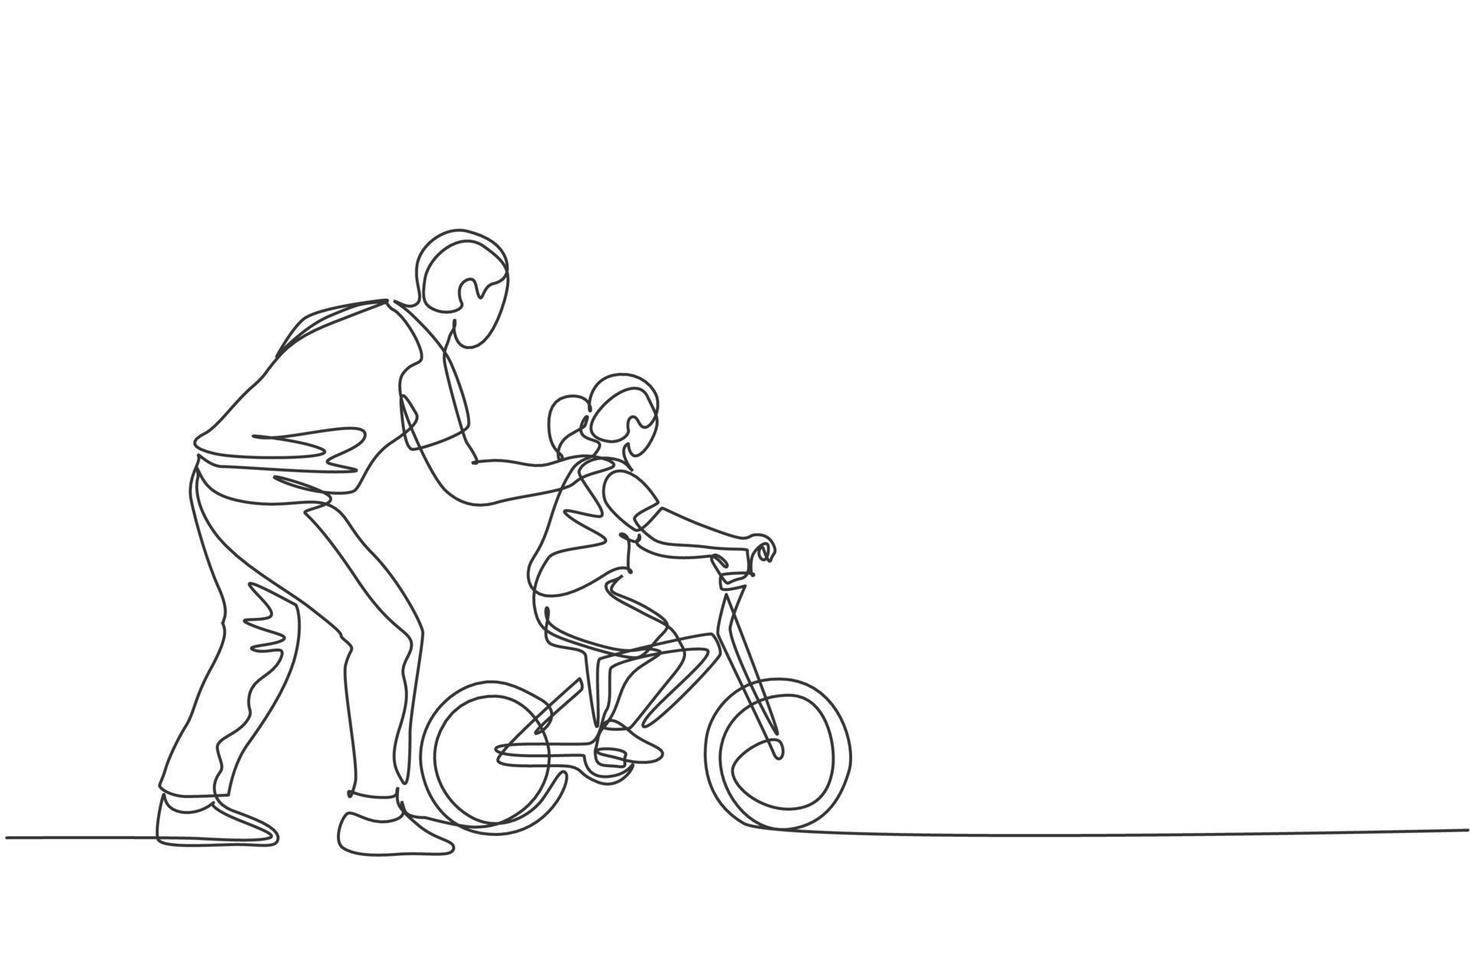 One single line drawing young father teaching his daughter riding bicycle at public park vector graphic illustration. Fatherhood lesson. Urban family time concept. Modern continuous line draw design